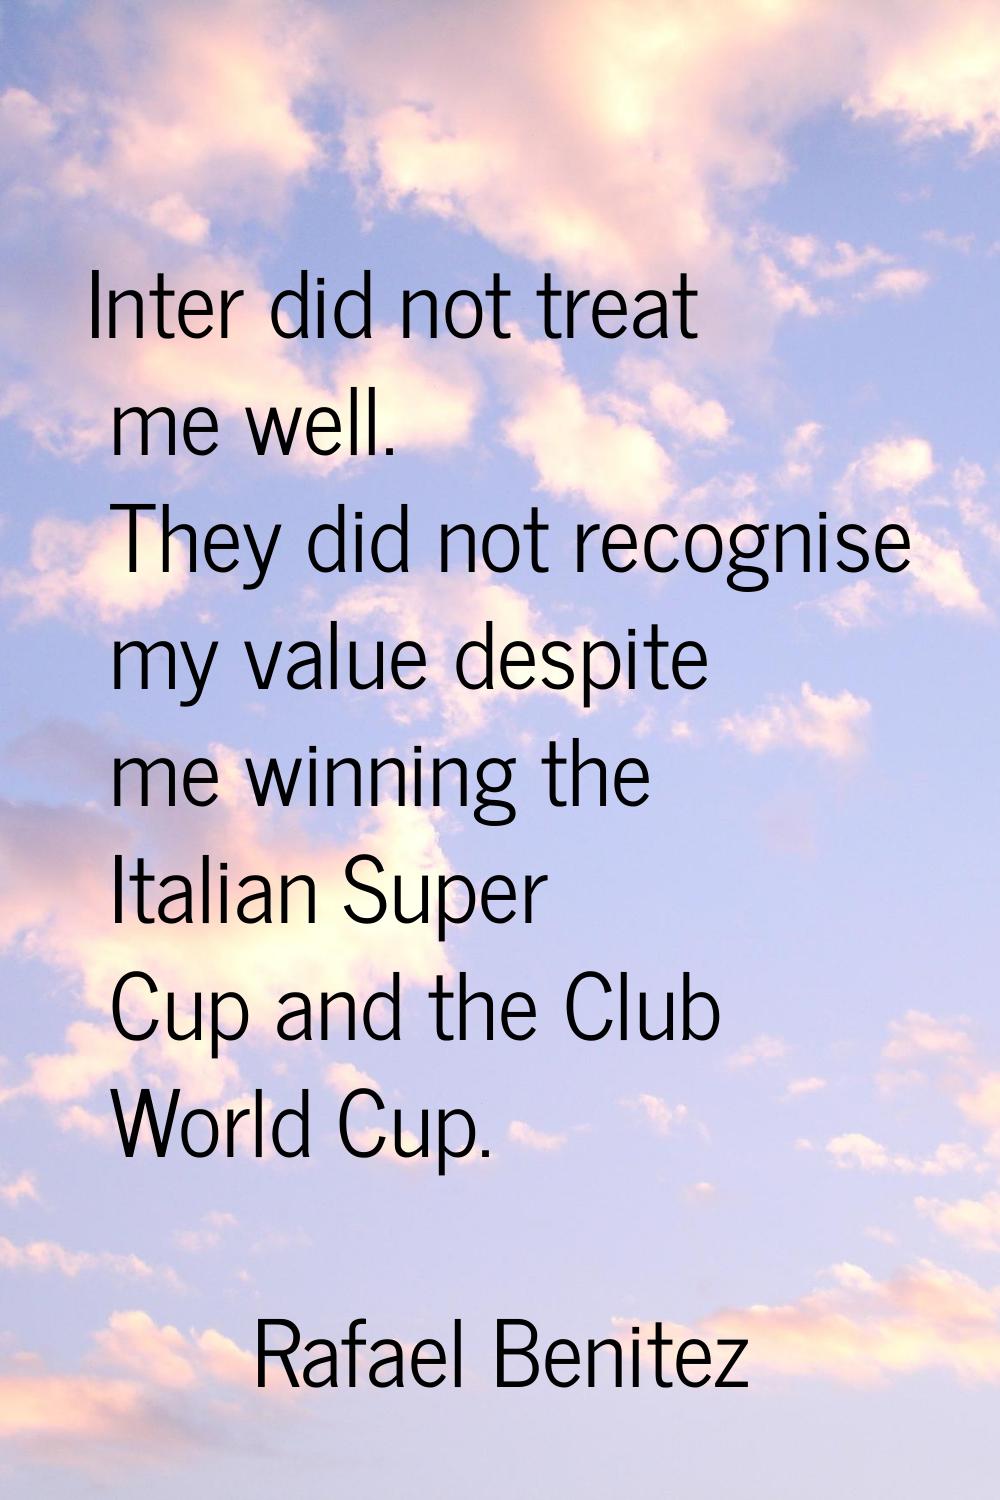 Inter did not treat me well. They did not recognise my value despite me winning the Italian Super C